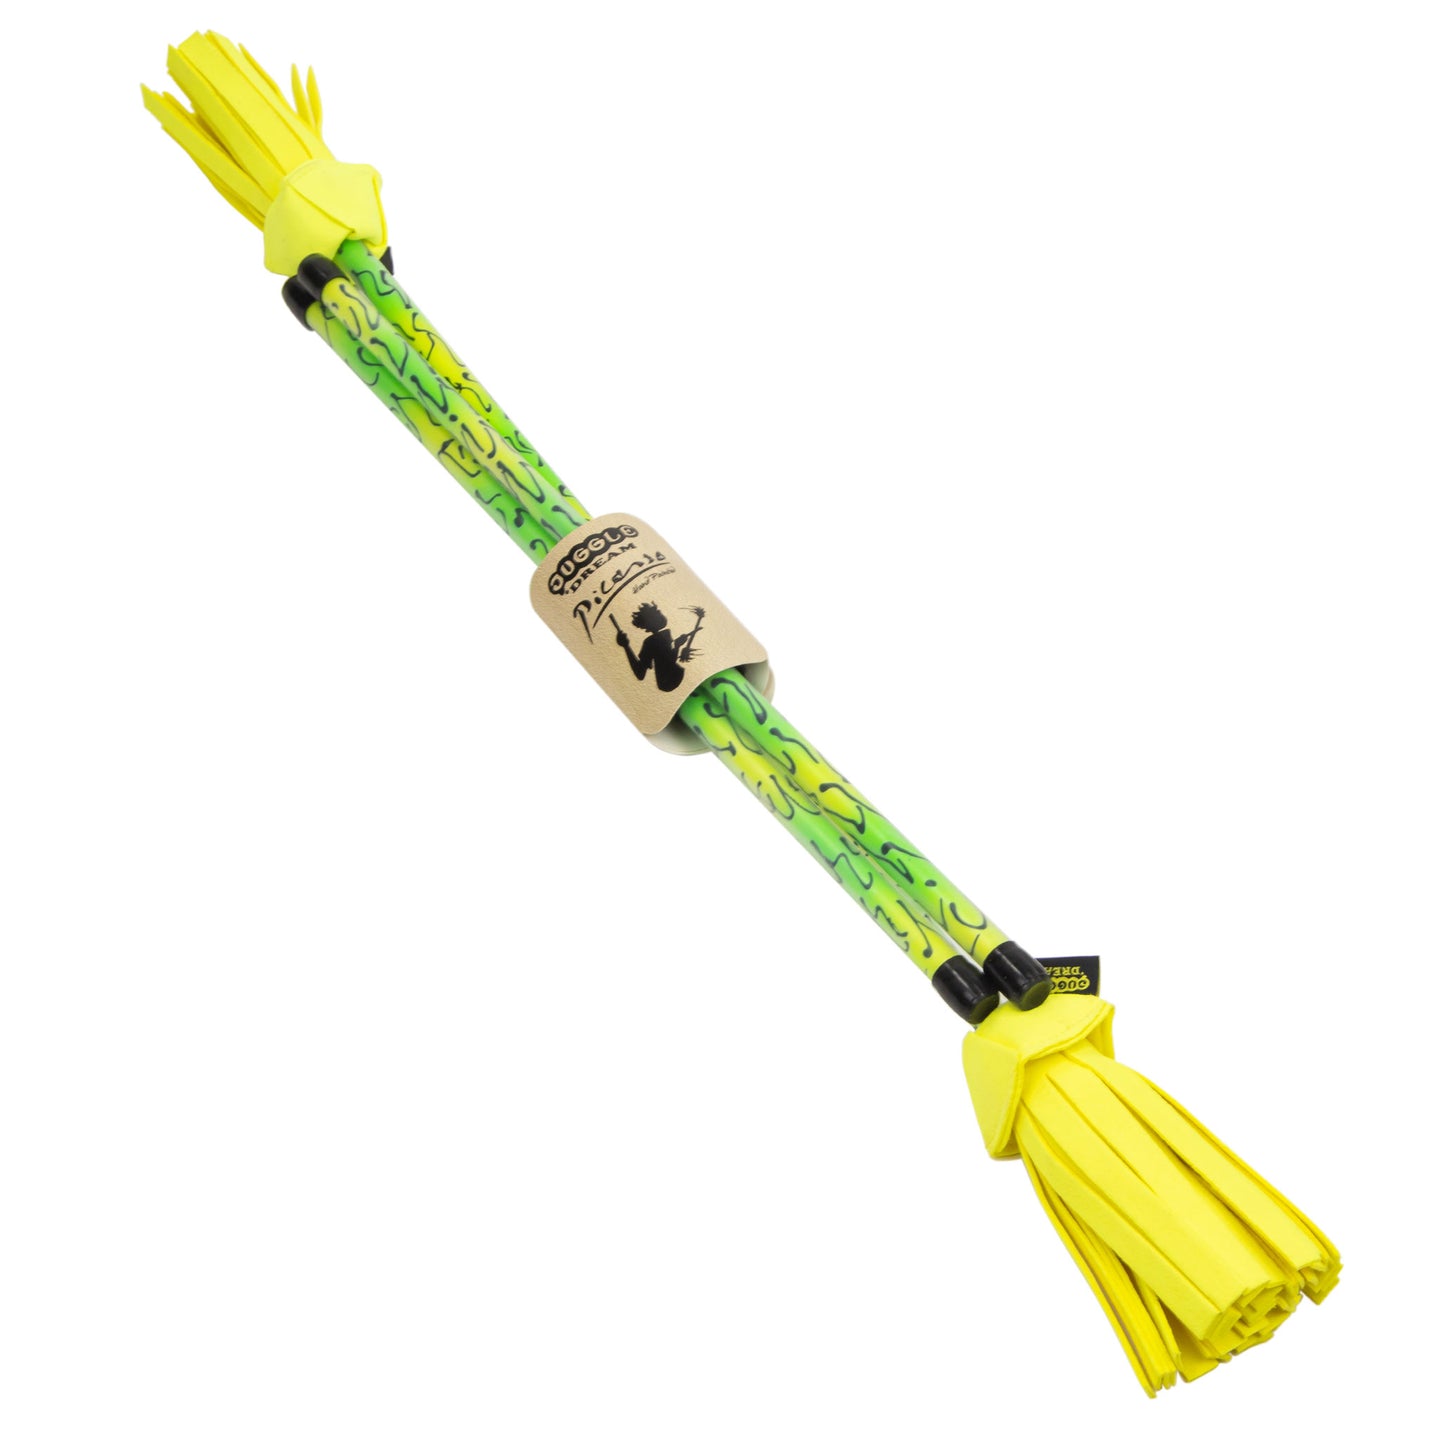 Packed Yellow/ Green Picasso Flower Stick with Handsticks 